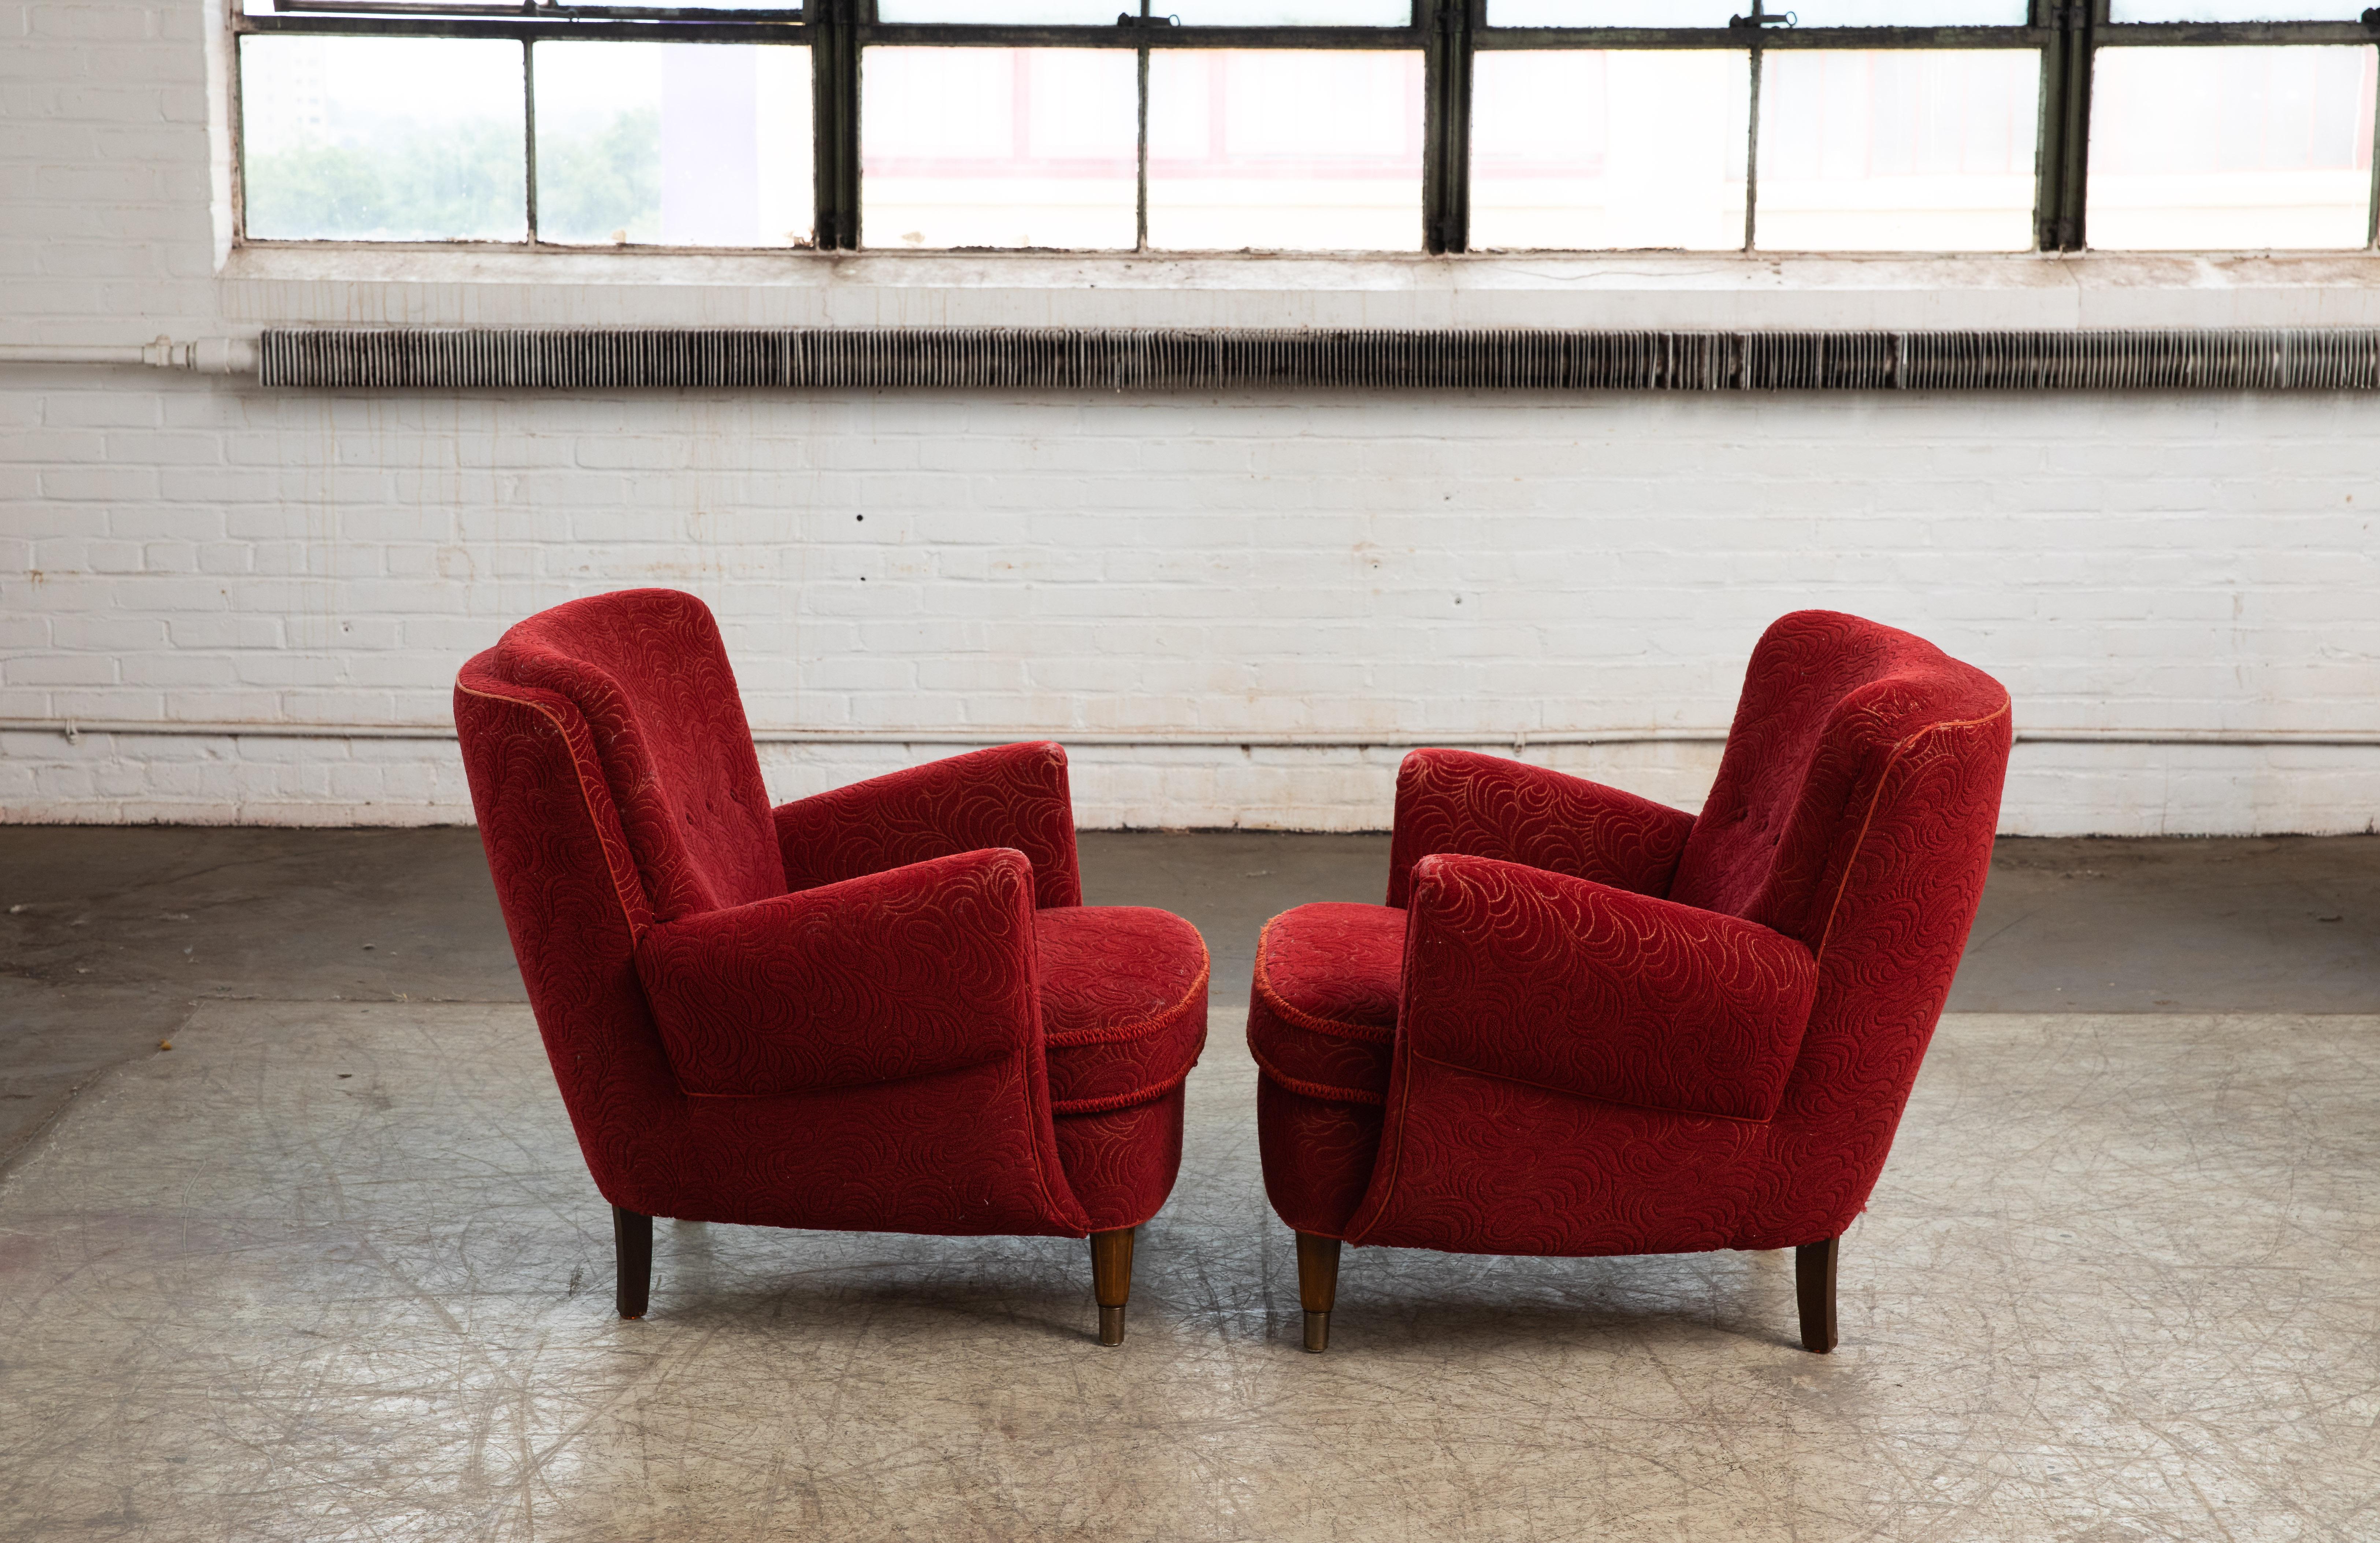 Mid-20th Century Pair of Danish 1950s Lounge Chairs in Red Mohair Attributed to Fritz Hansen